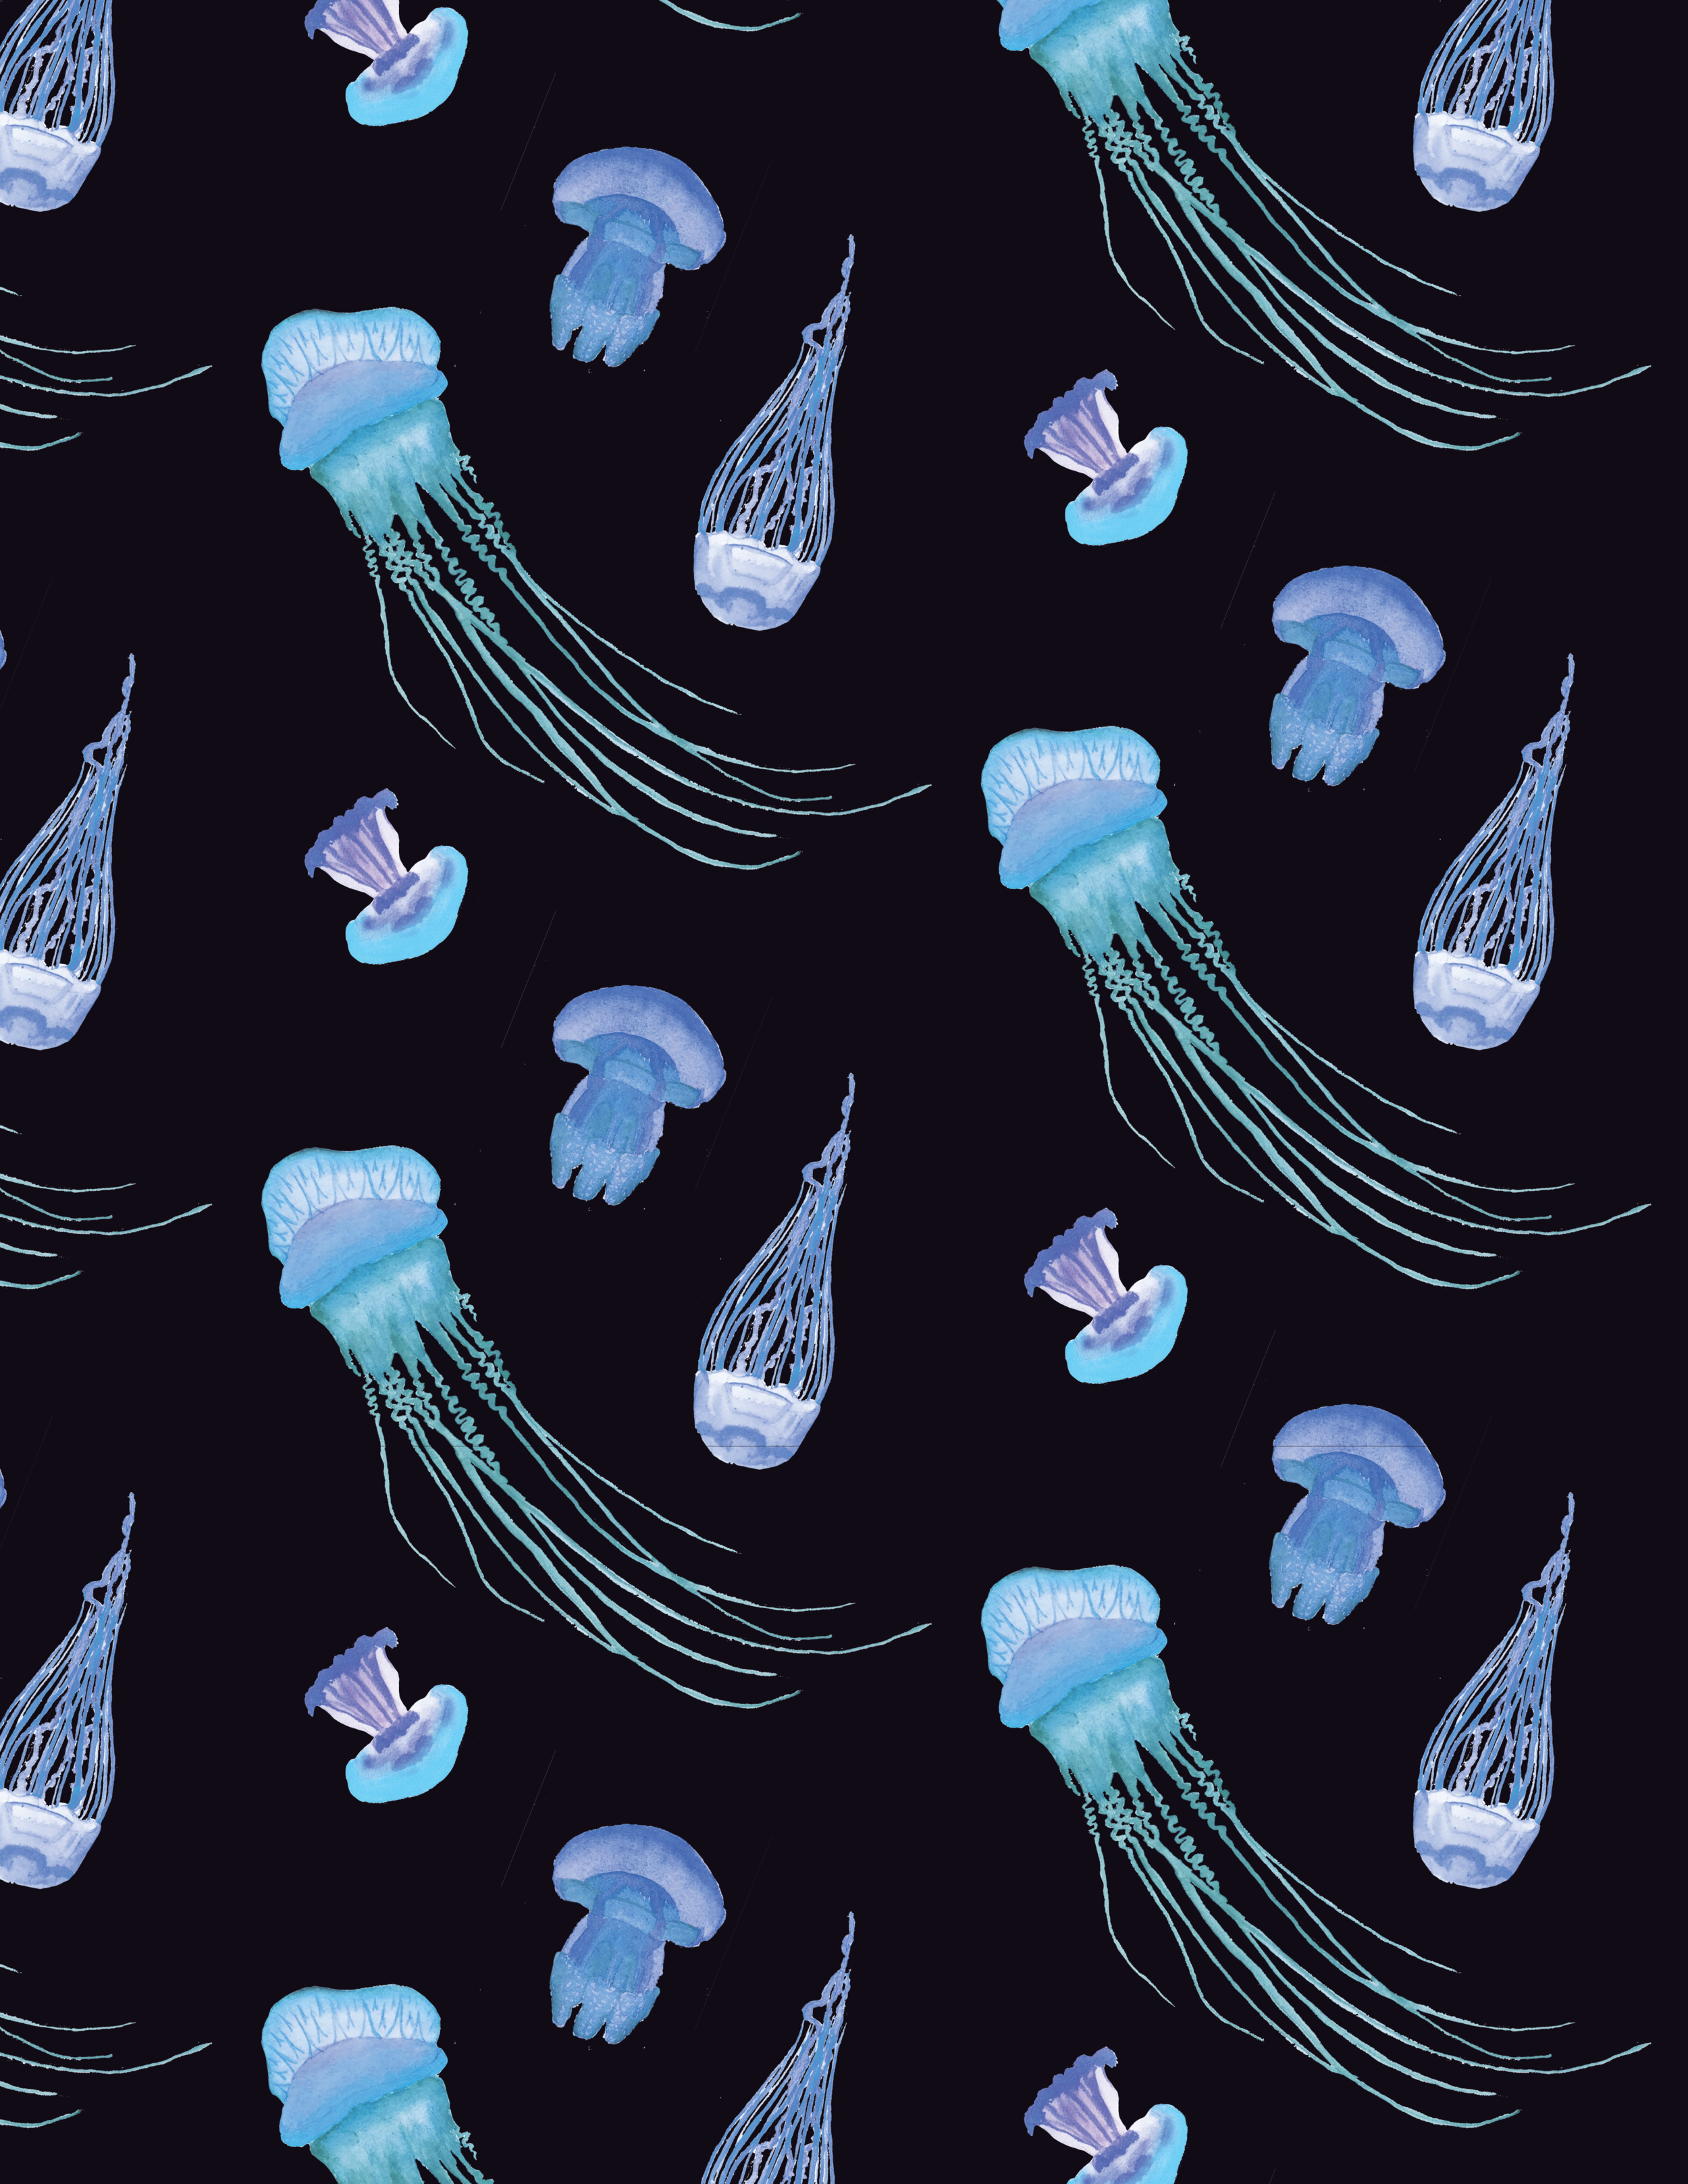 jellyfish wallpaper blue and black-01.png